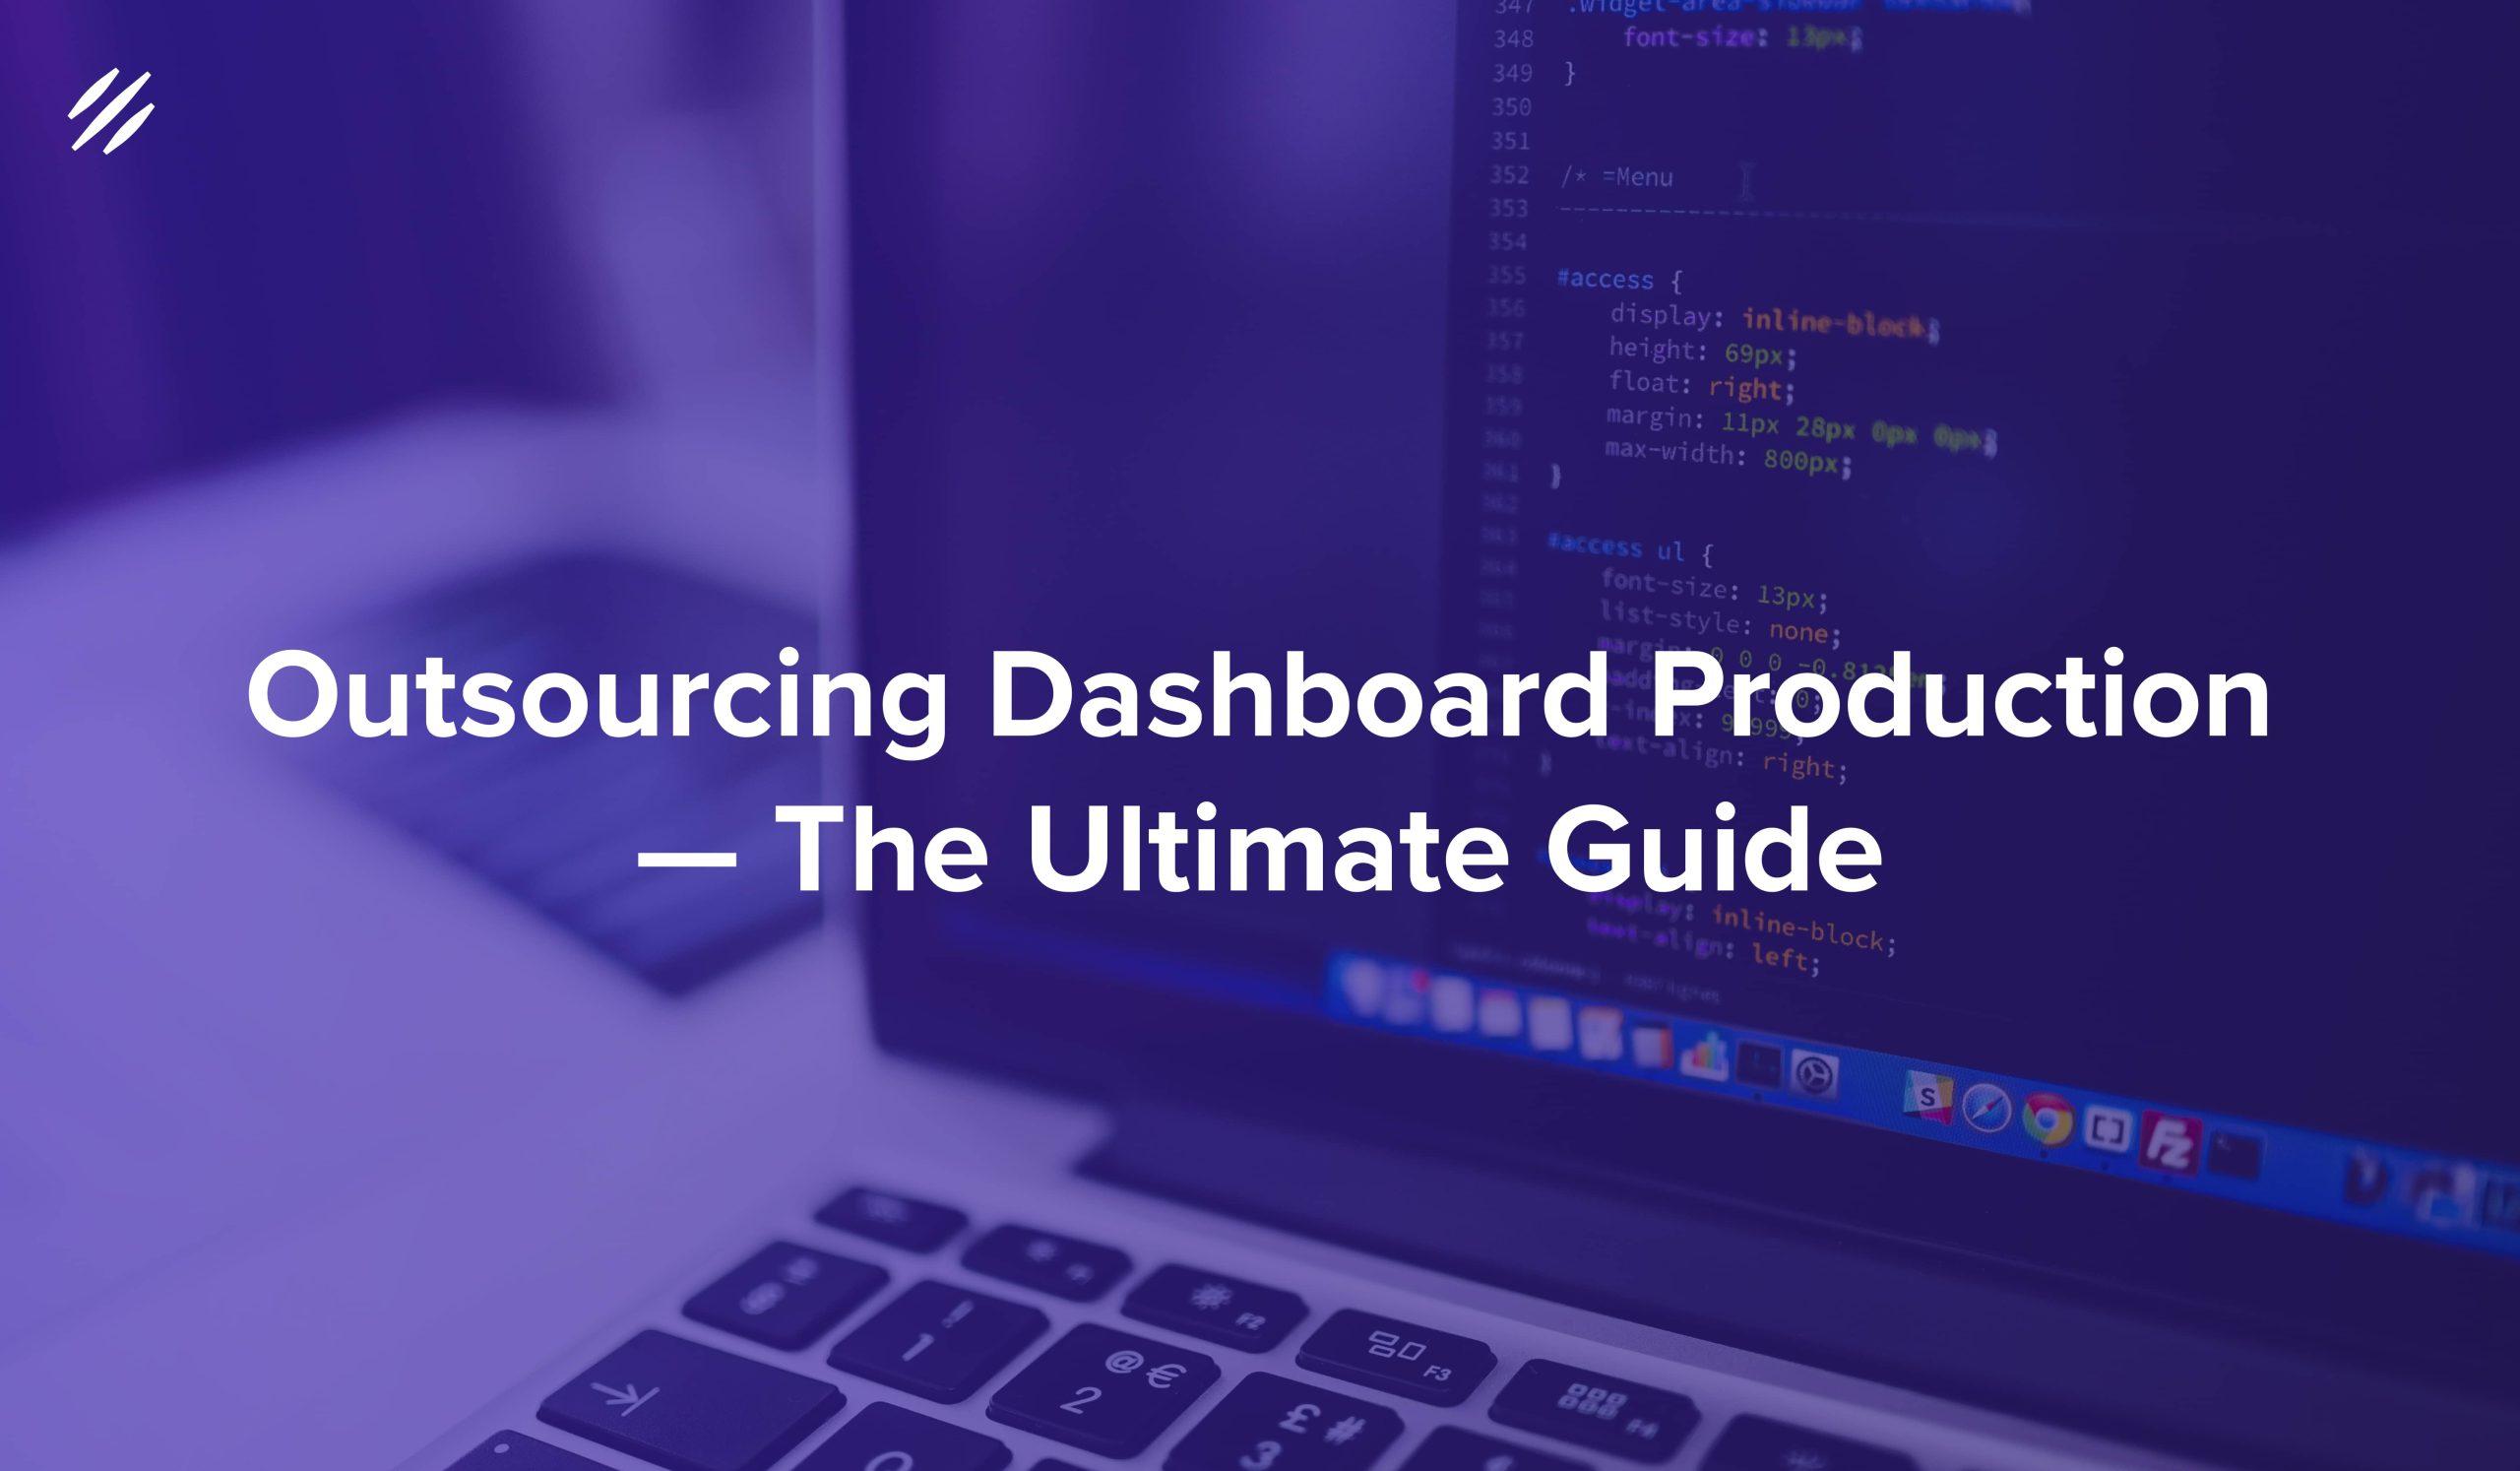 The Ultimate Guide to Outsourcing Dashboard Production